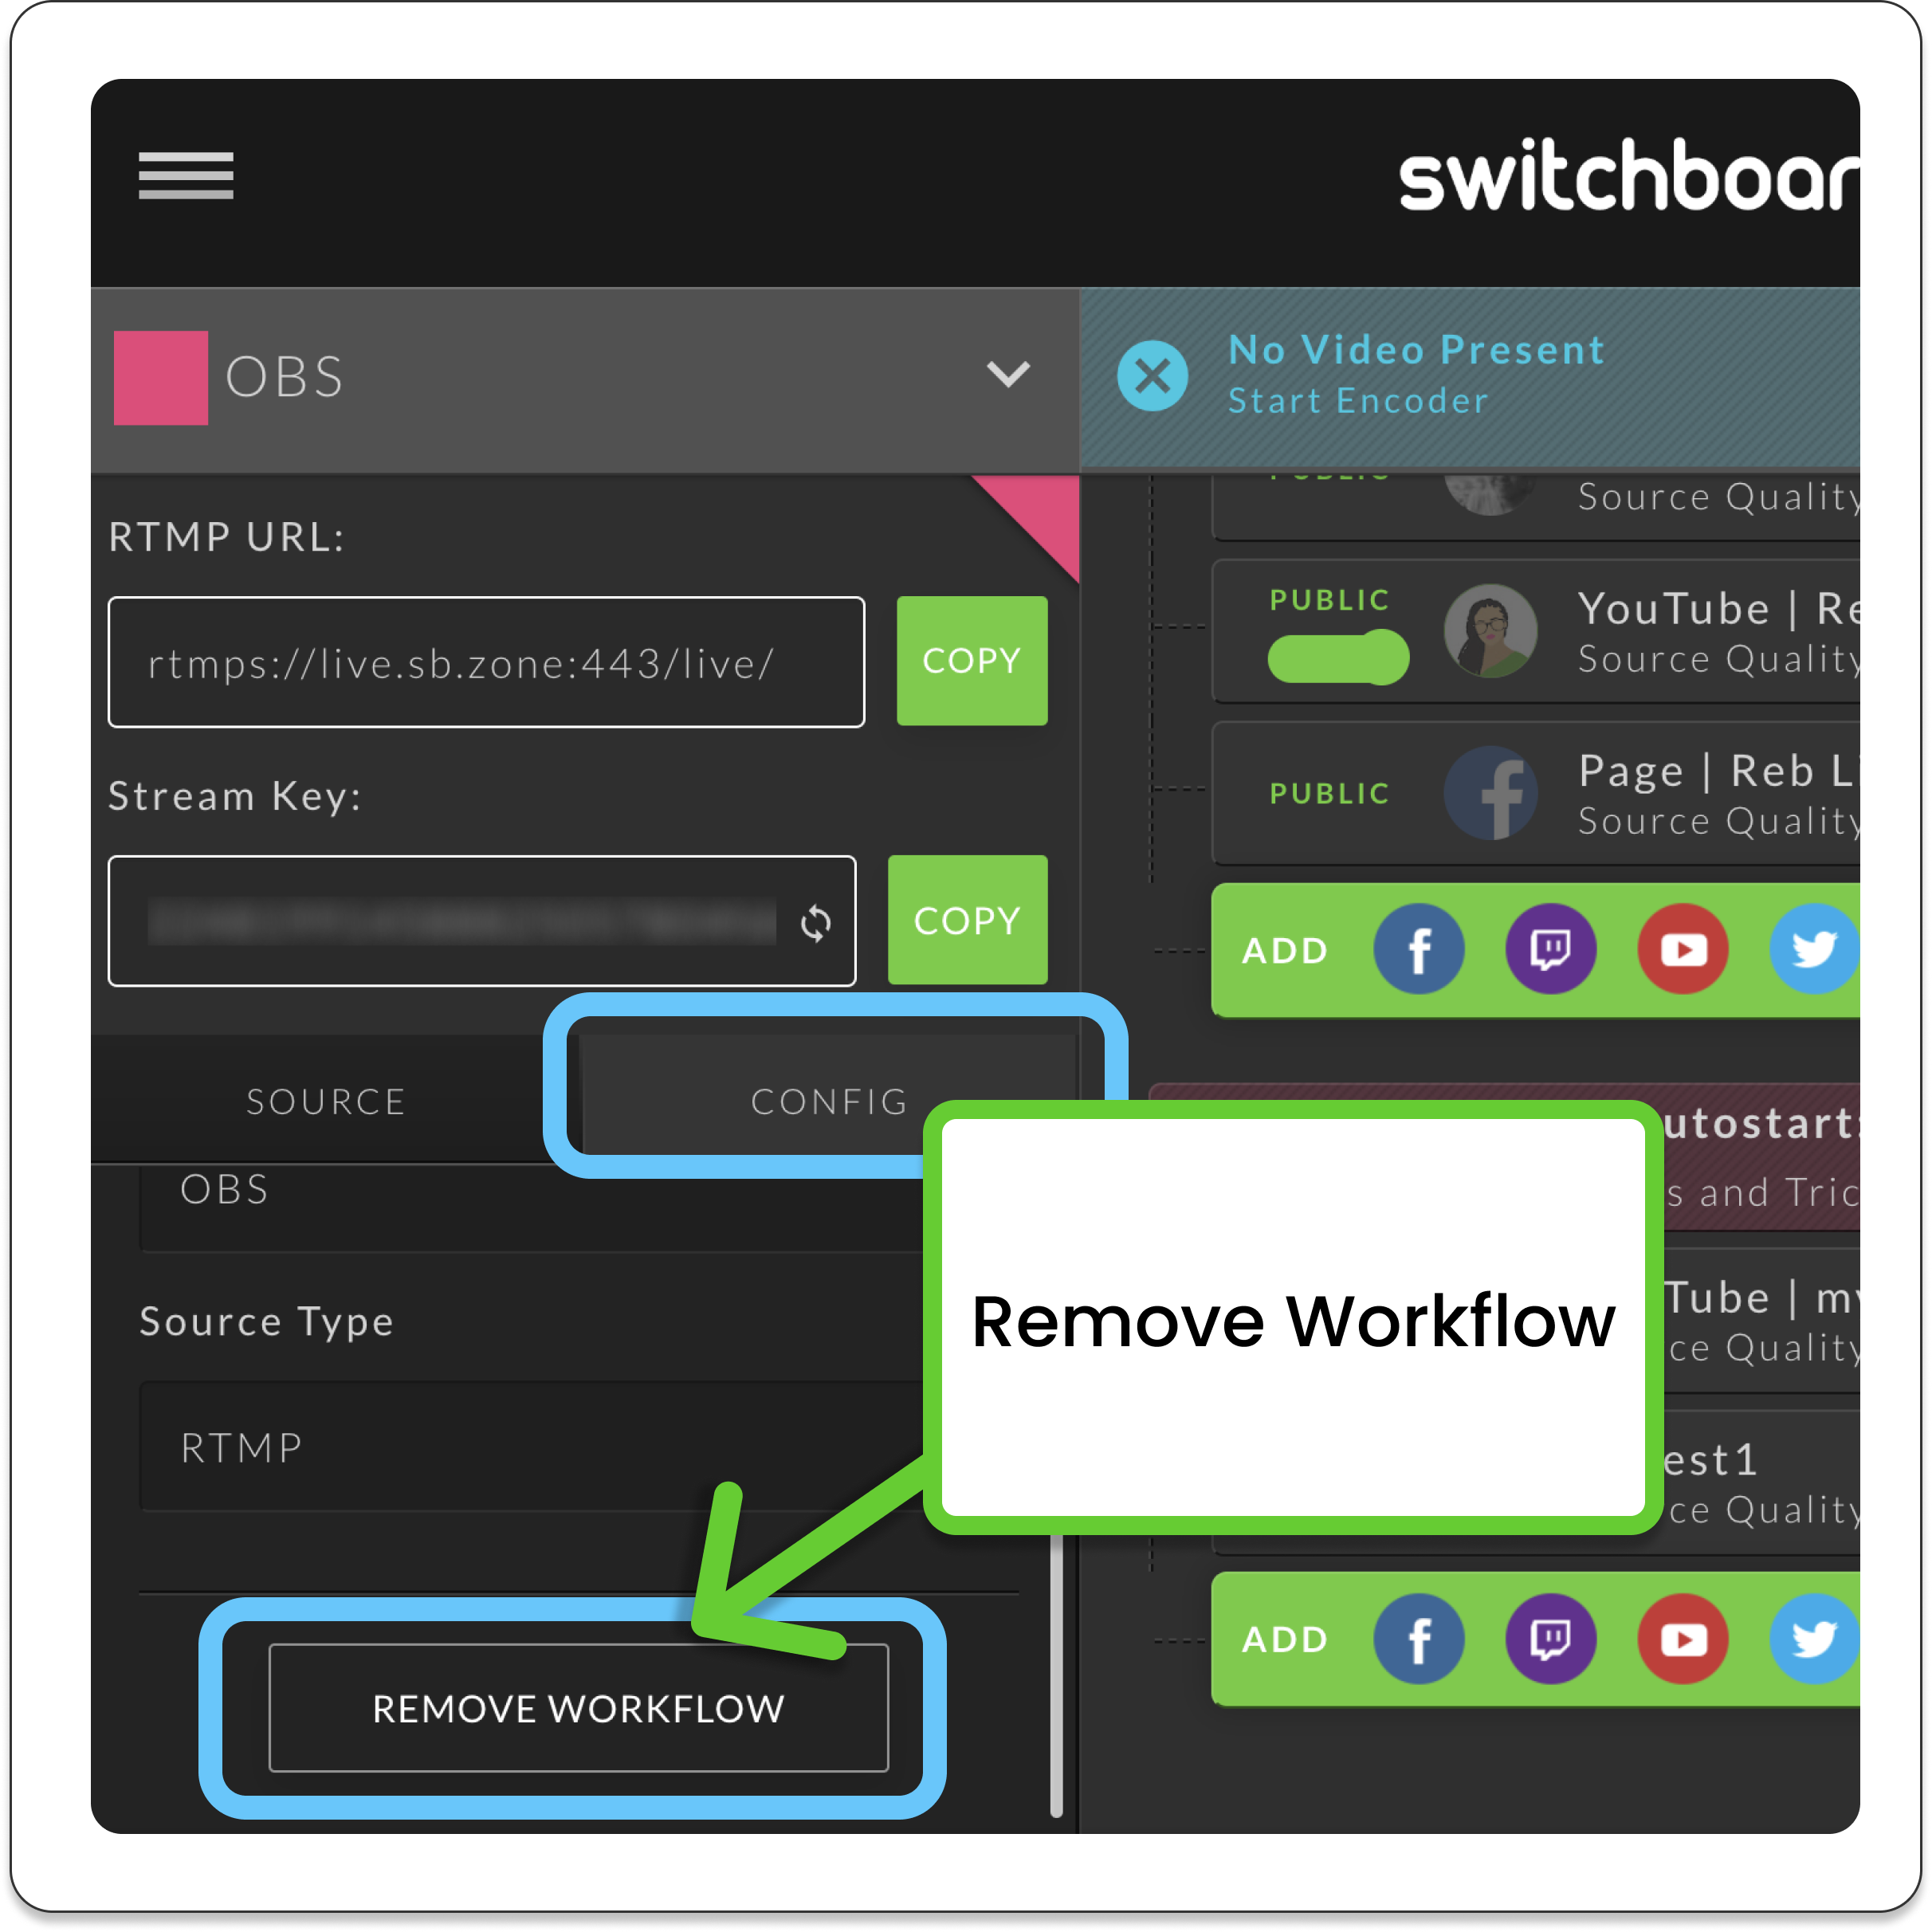 switchboardlive_Workflow_pane_tabs_config-remove-workflow.png